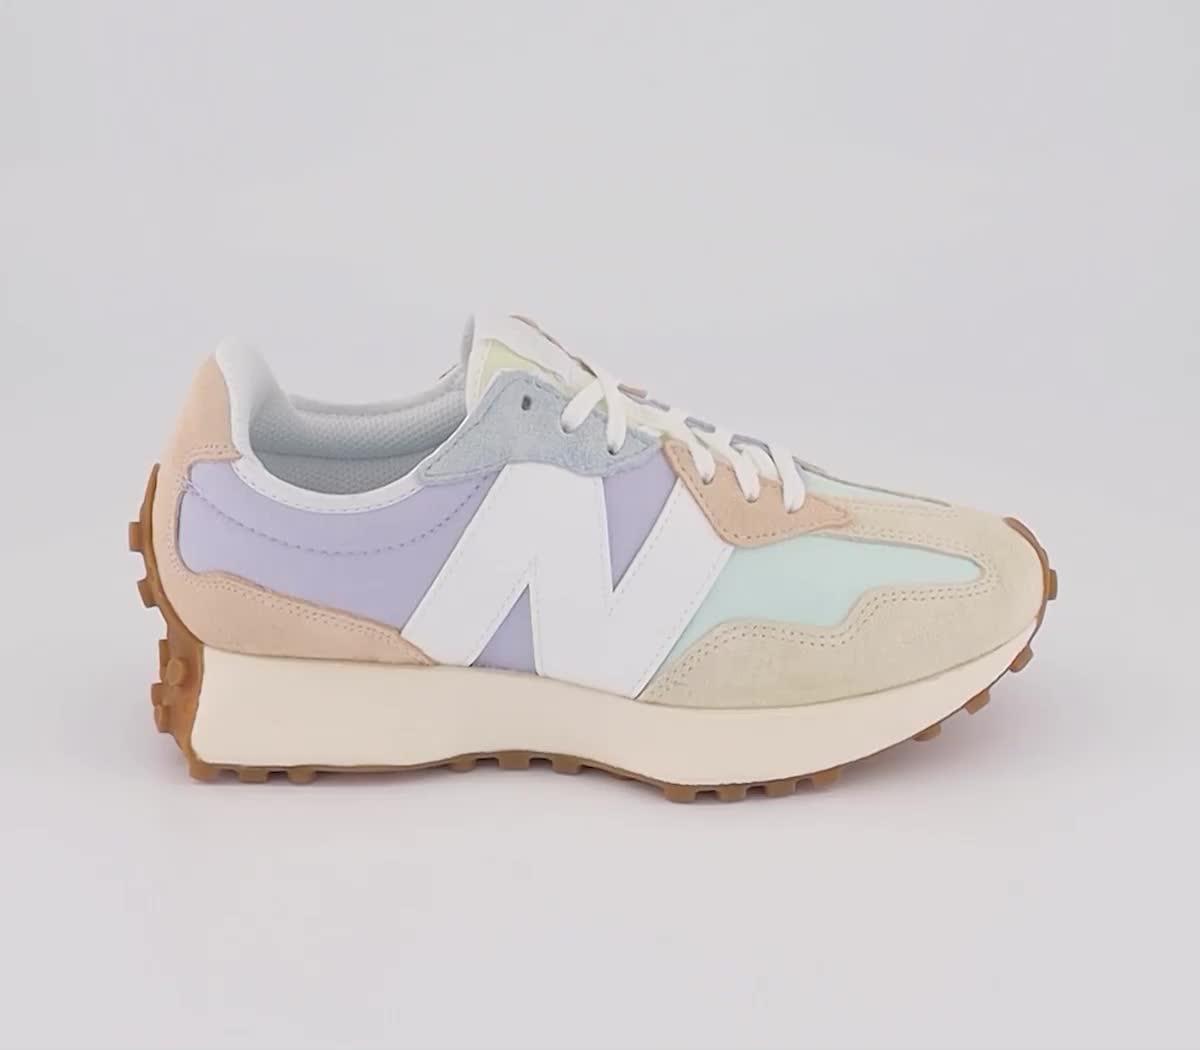 Teseo Reproducir lento New Balance 327 Trainers Mint Lilac Beige White Gum - Women's Trainers